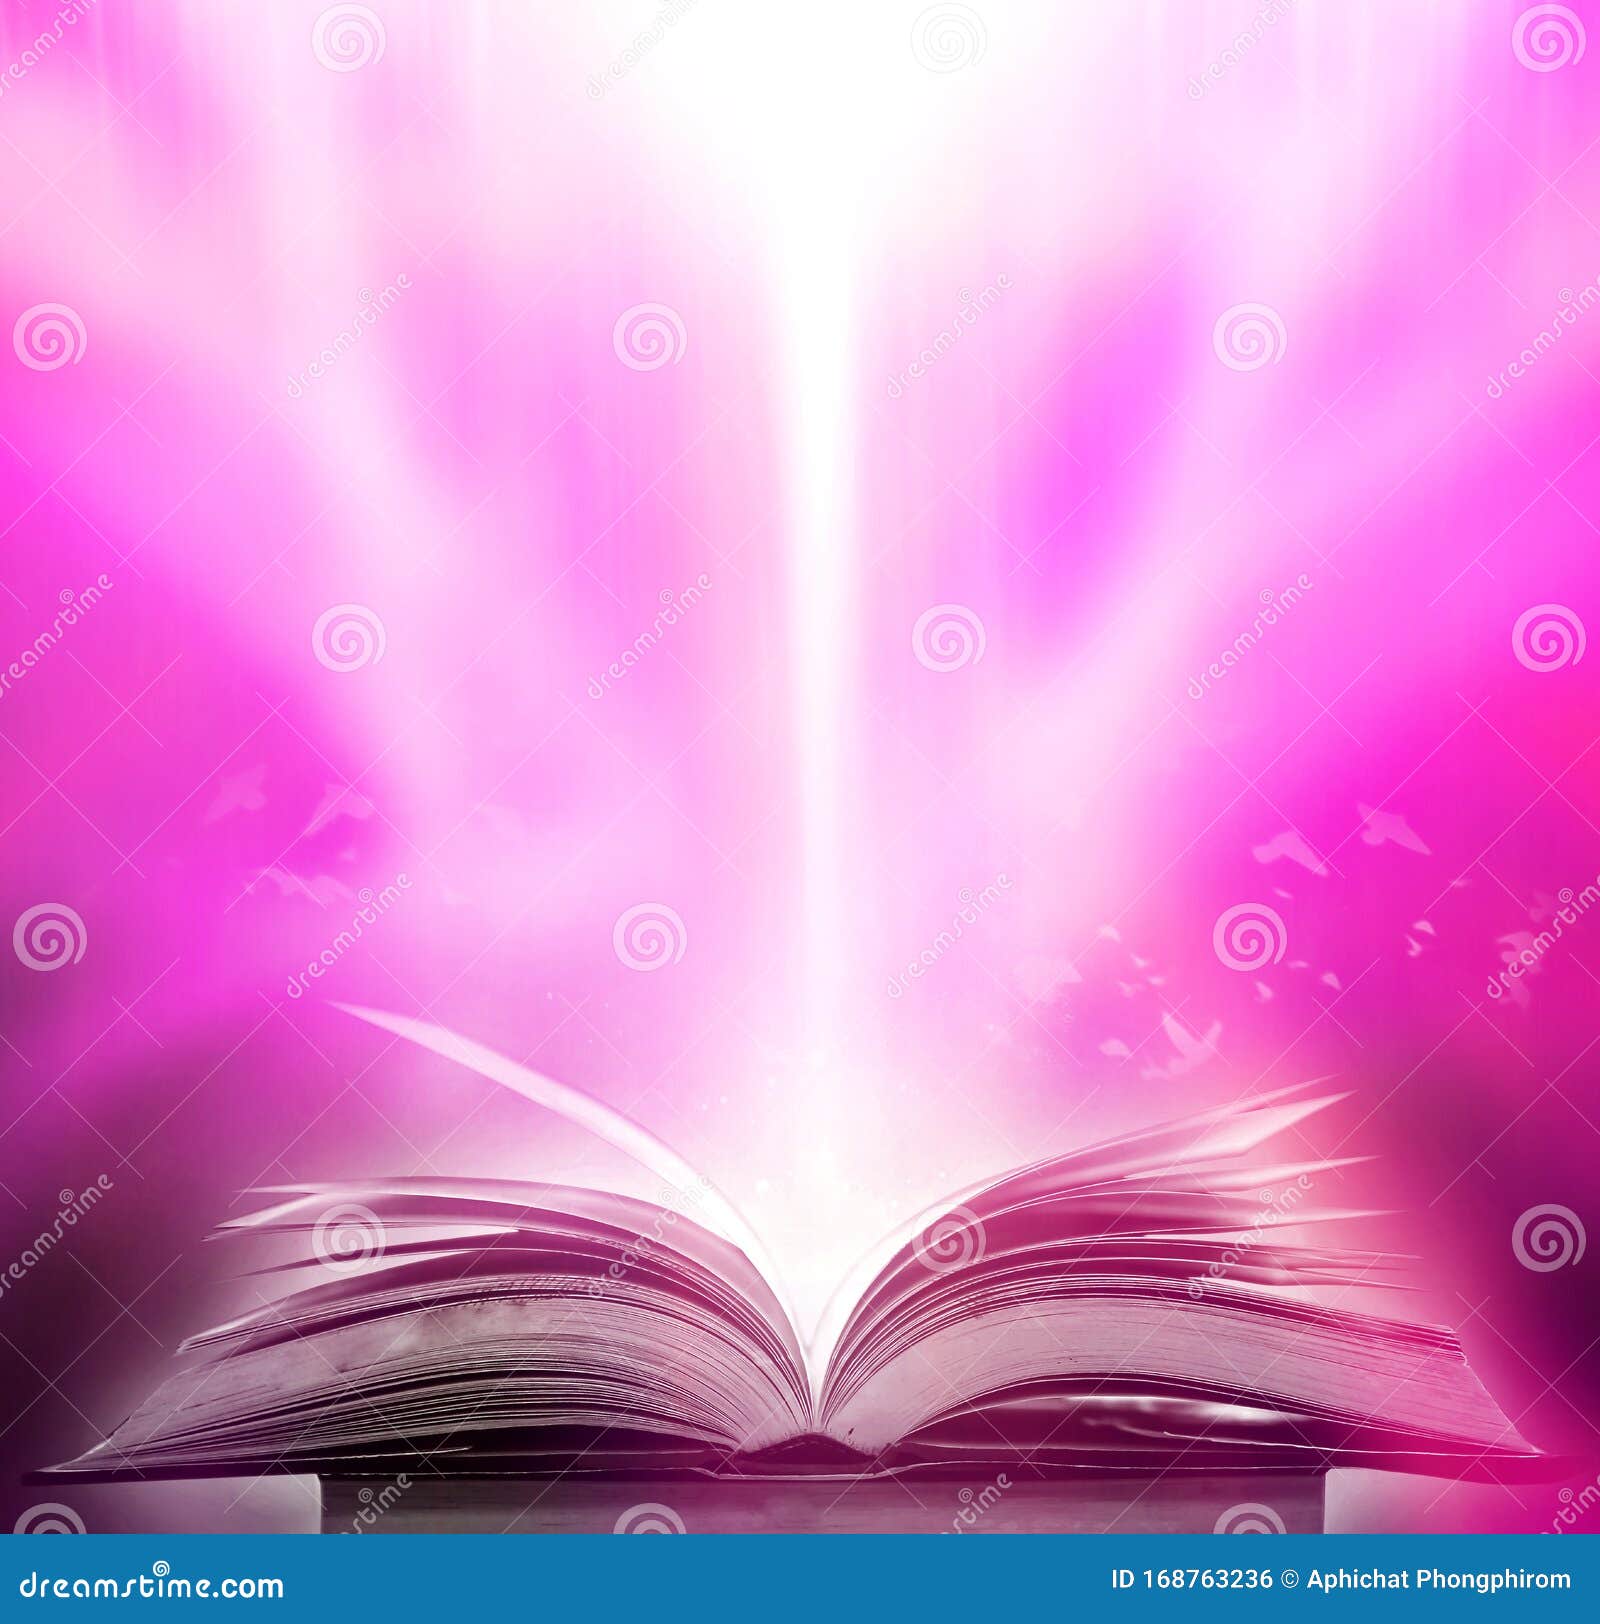 Open magic book with magic lights on a black background, Stock image